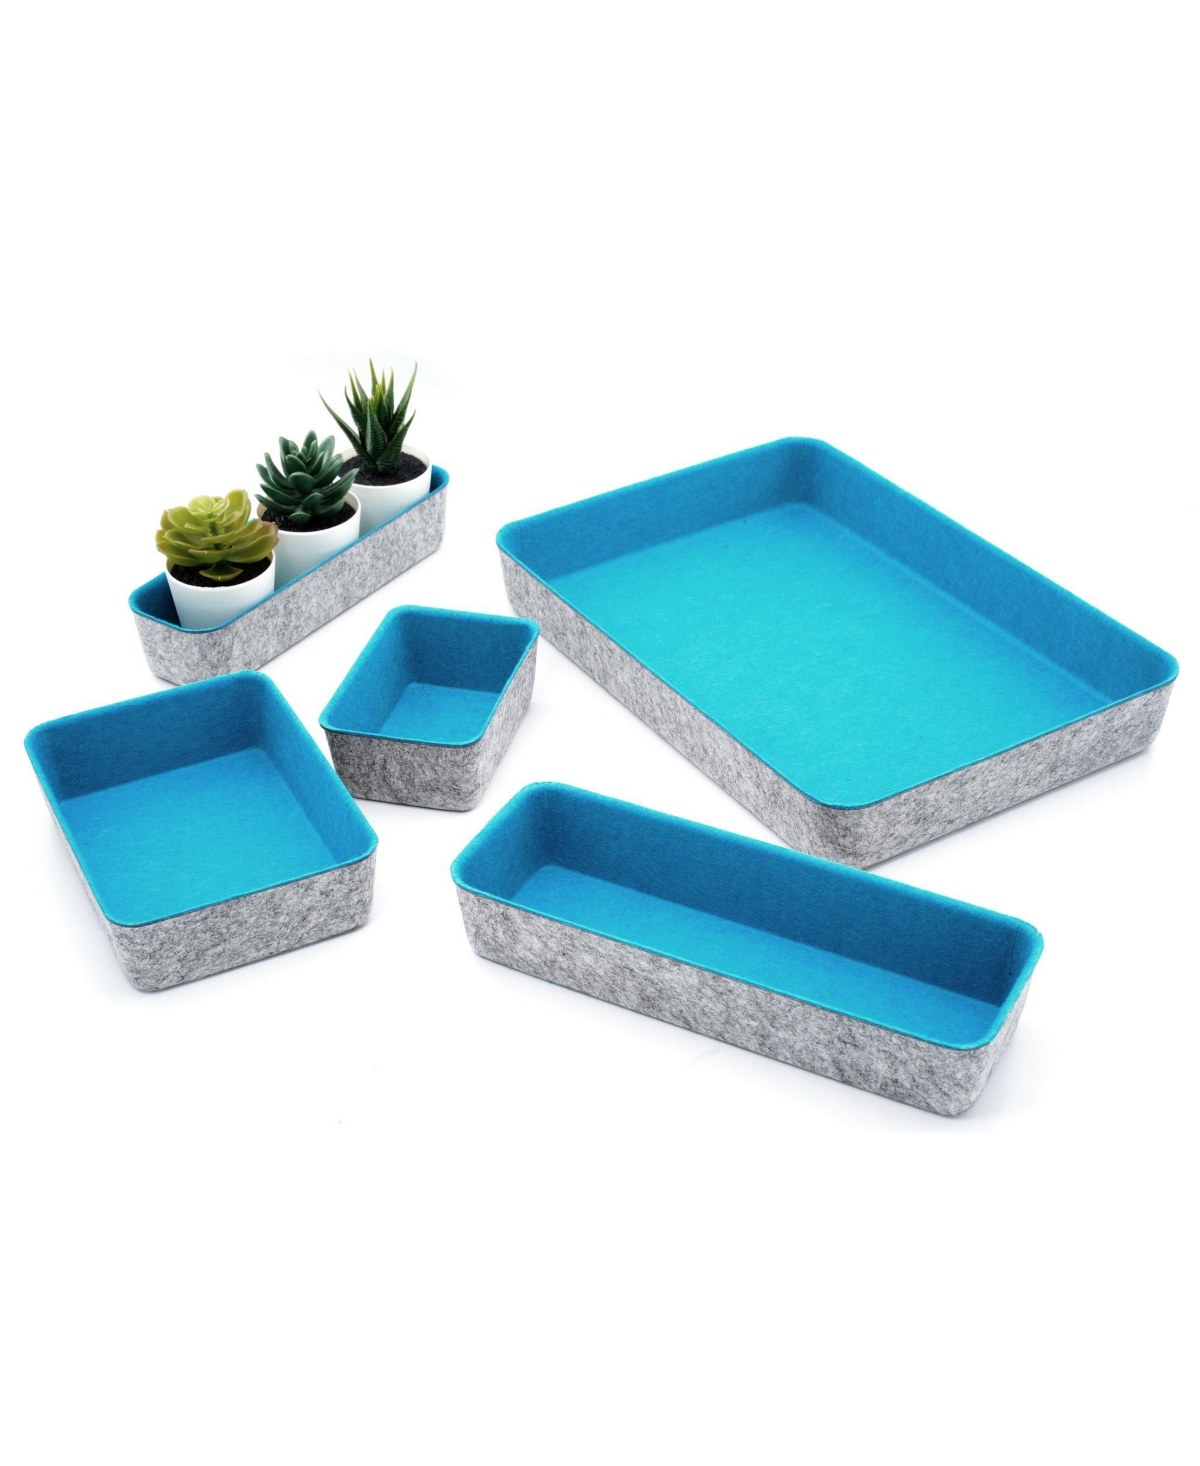 Shop Welaxy Felt 5 Piece Desk And Drawer Organizer Tray Set In Turquoise